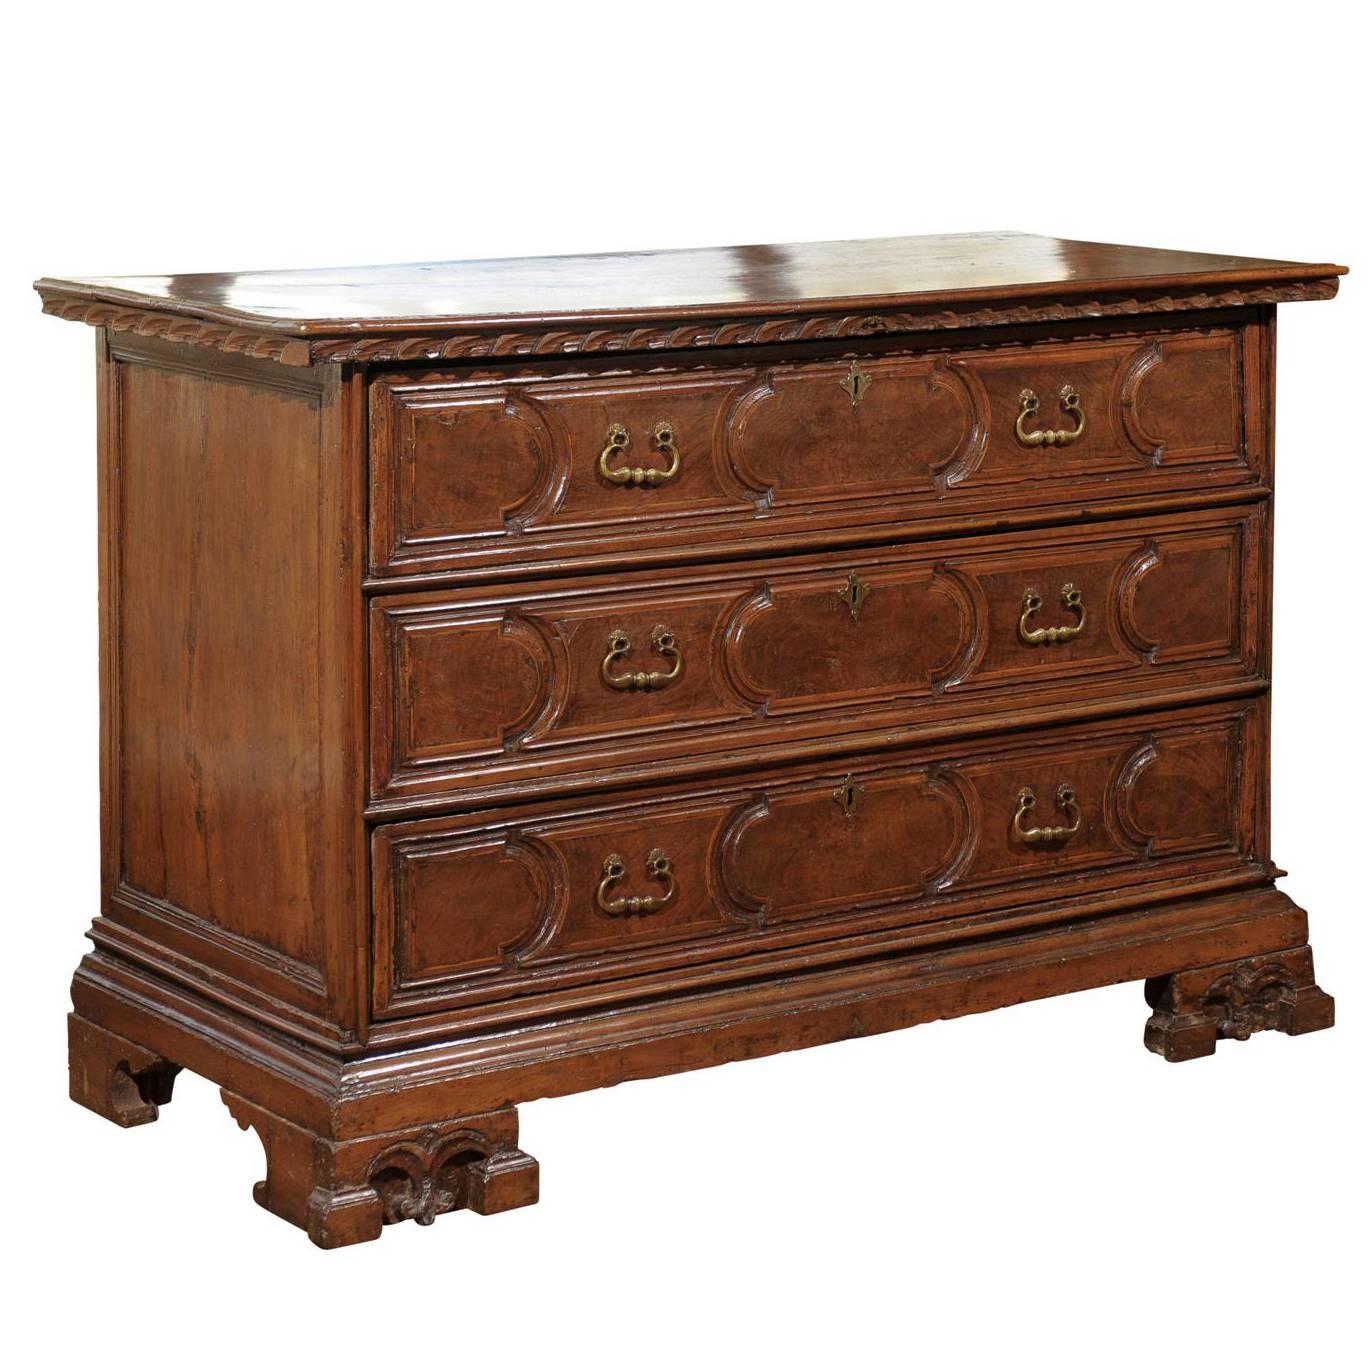 Tall Italian 1790s Three-Drawer Commode With Cartouches and Bracket Feet.